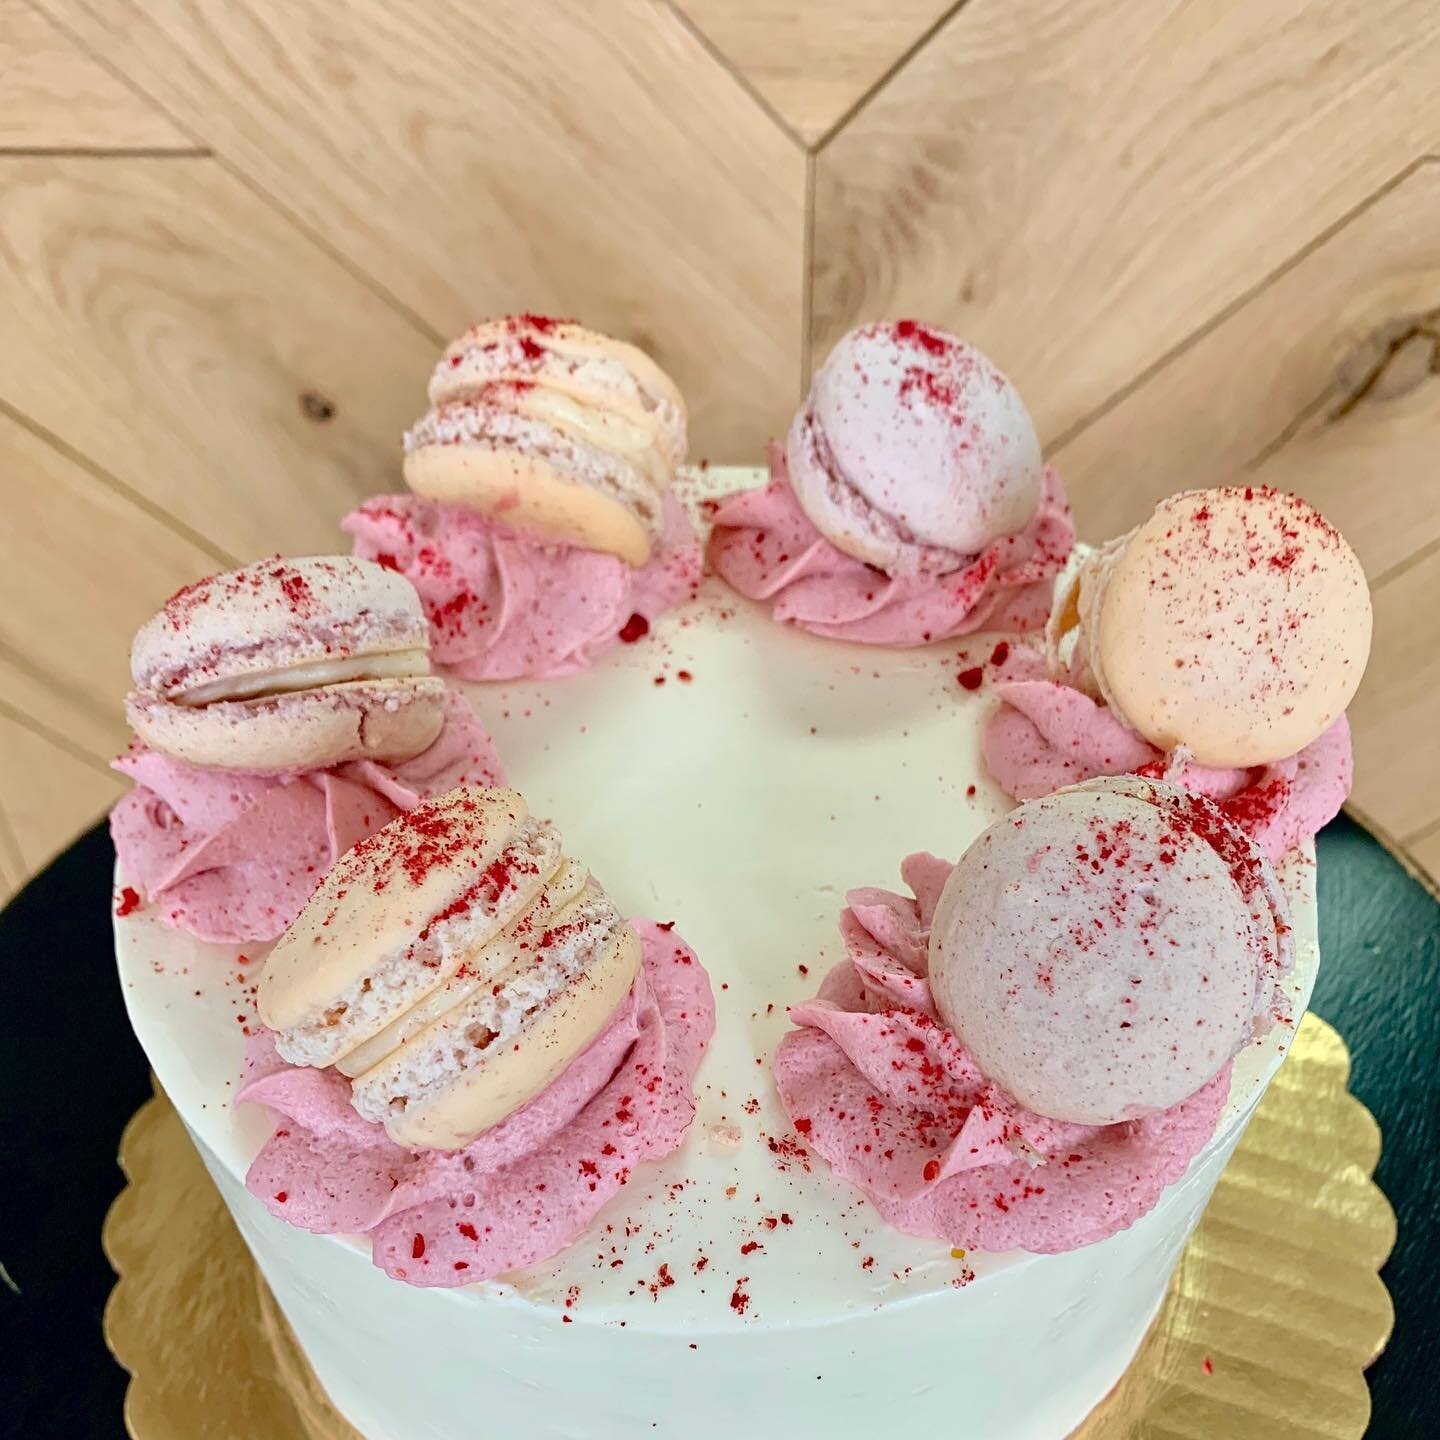 Our Mother&rsquo;s Day Menu is LIVE!

This year we will be celebrating moms with Lemon Raspberry Mousse Cake, Strawberry Rhubarb Pie, Biscuits &amp; Jam w/ Mascarpone Cream Kits, and a Special Shortbread Box!

We will also have some classics availabl